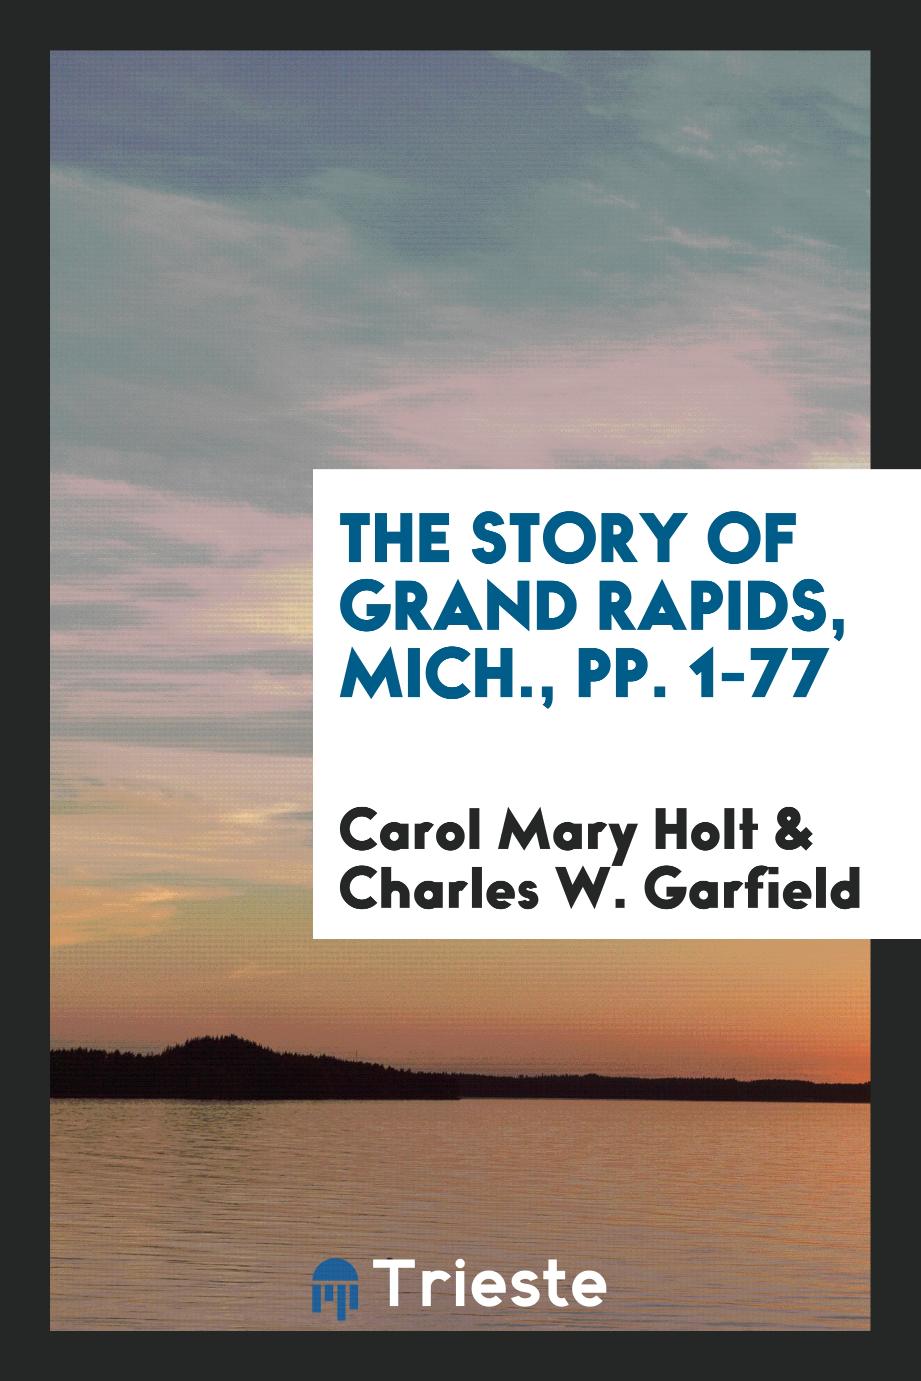 The Story of Grand Rapids, Mich., pp. 1-77